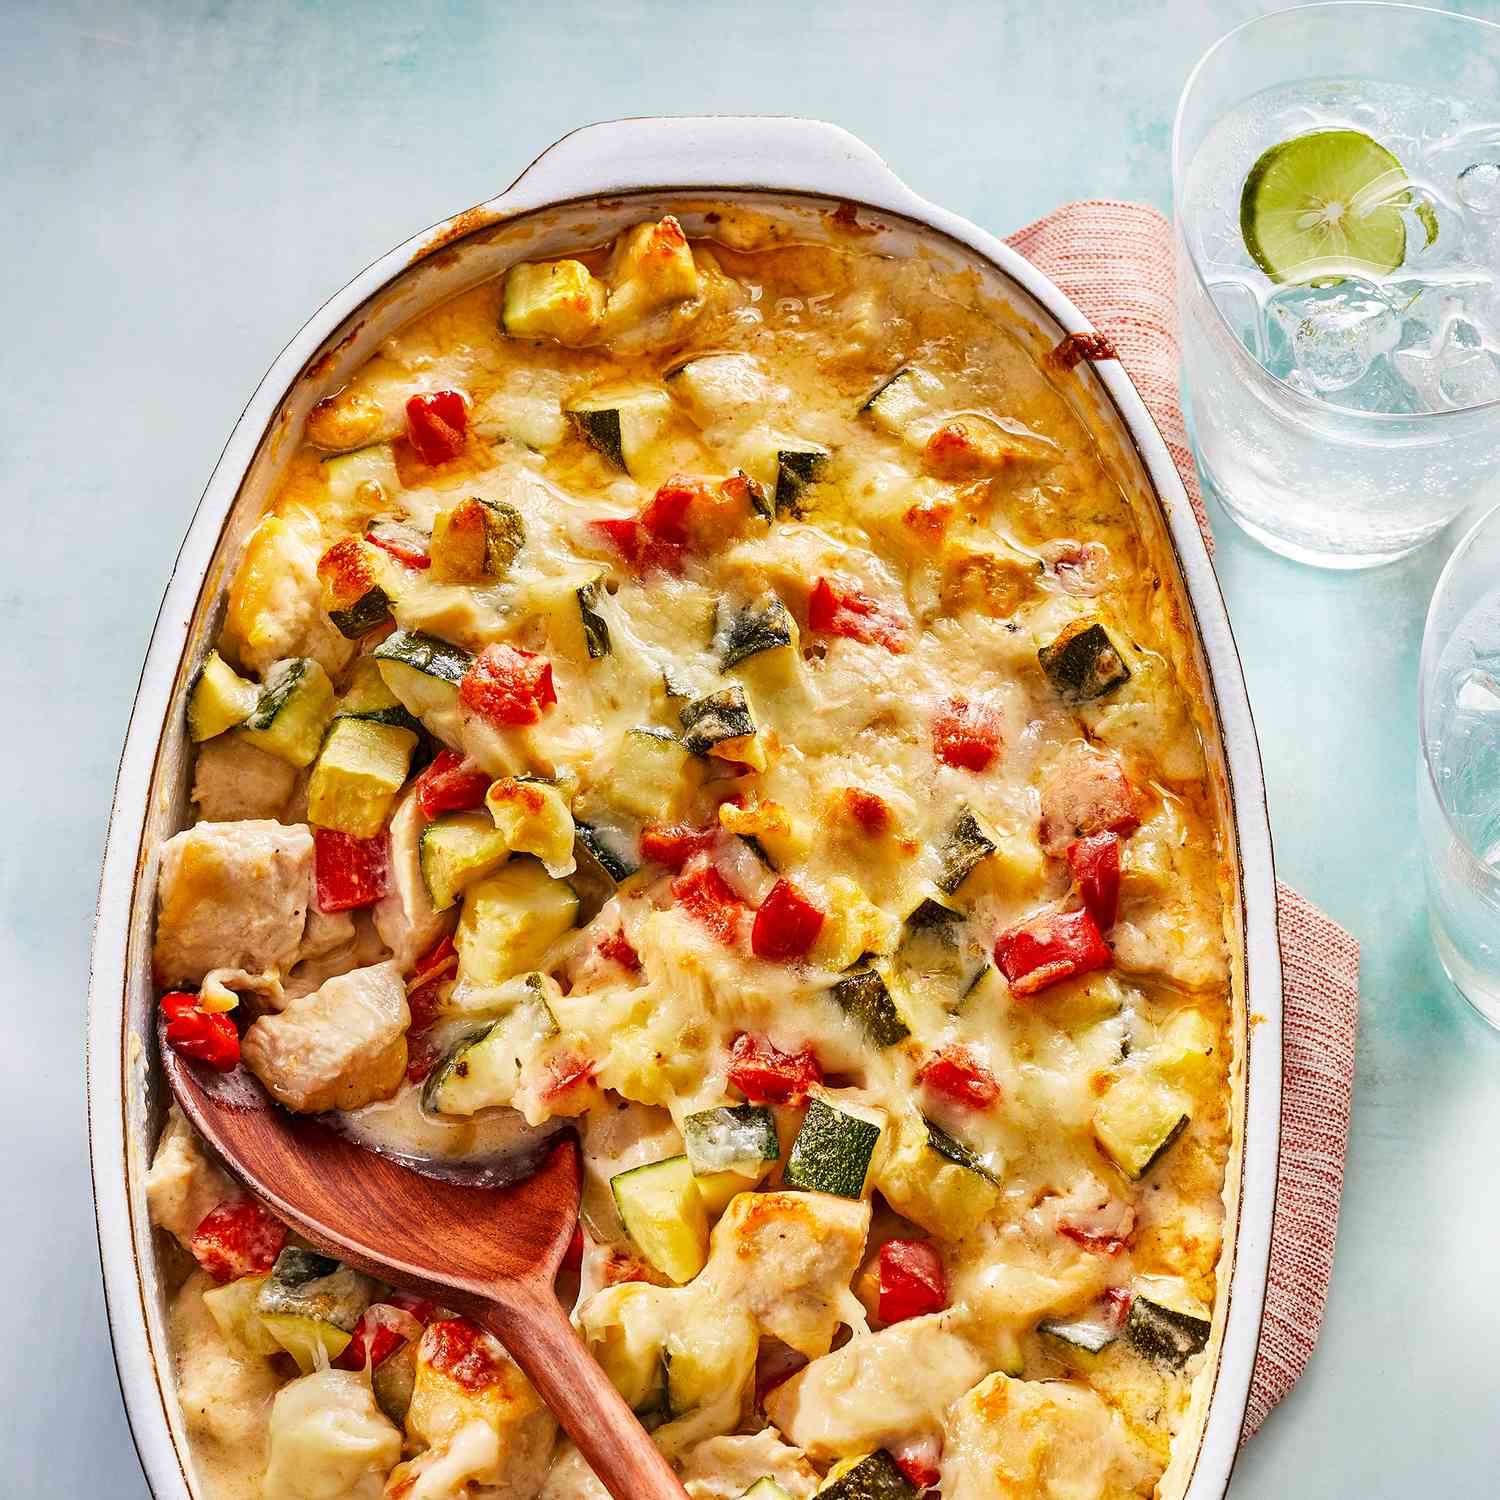 Chicken and Summer Squash Casserole Recipe: Healthy, Hearty, and Delicious